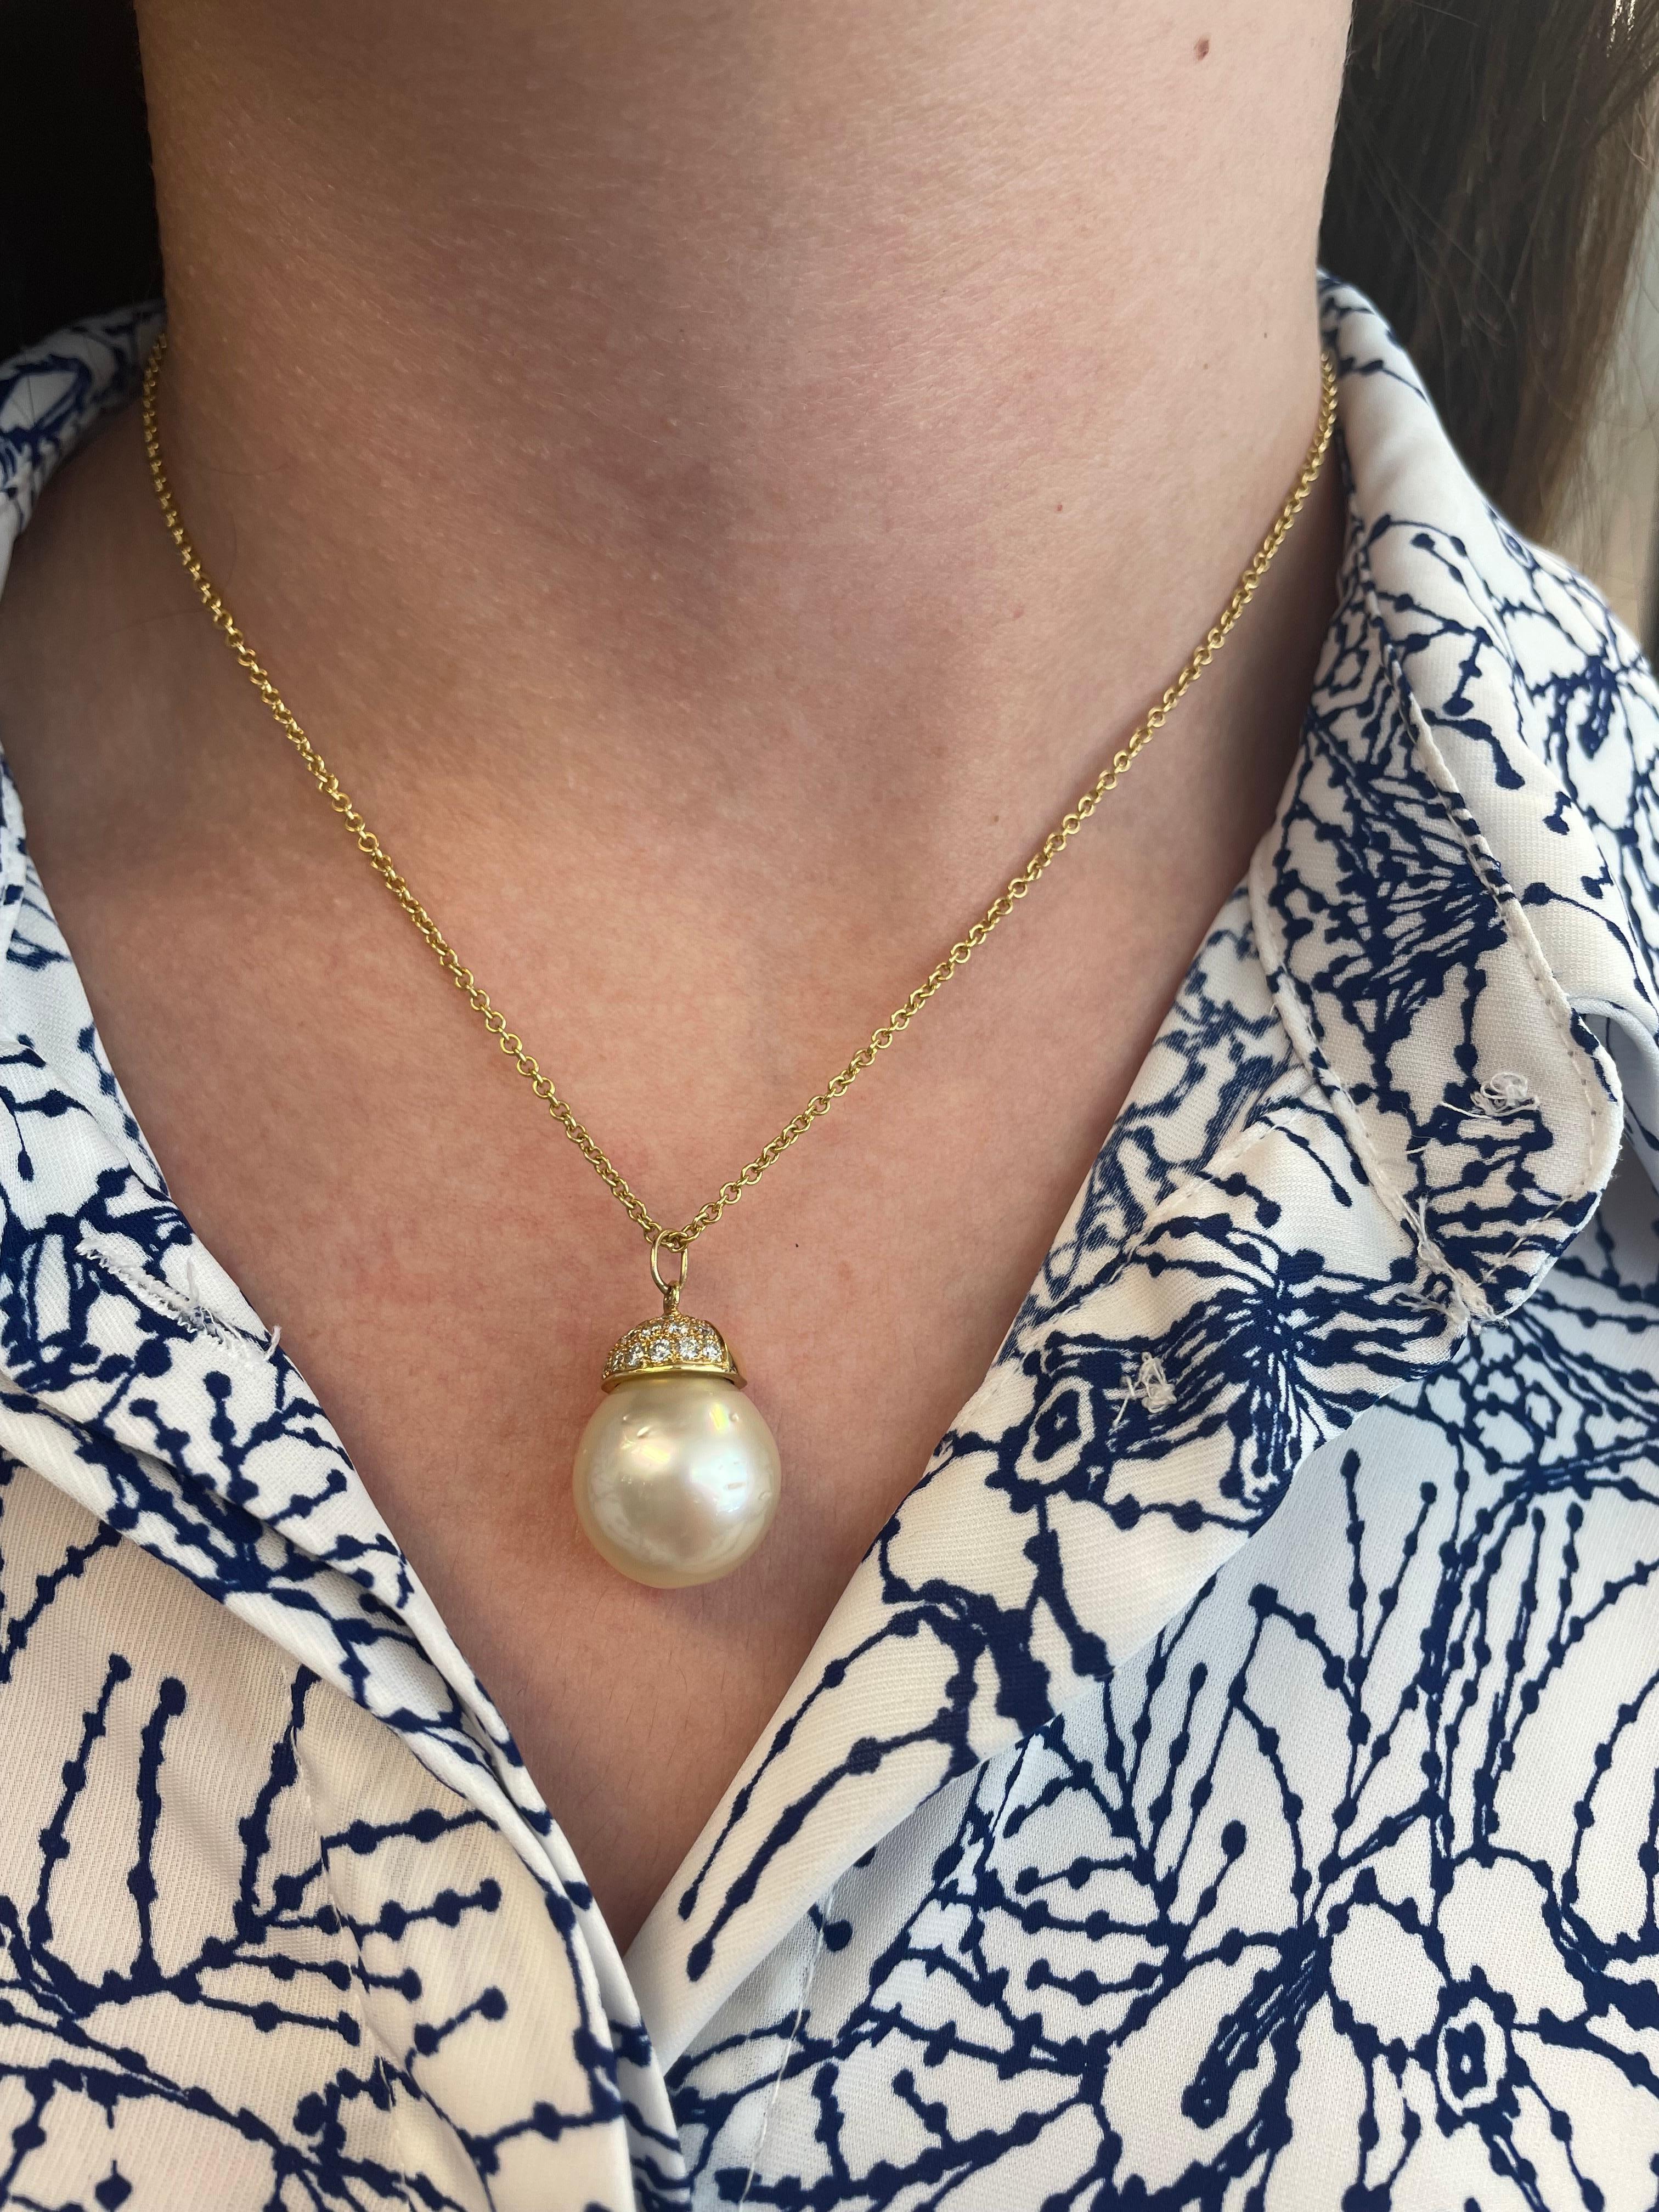 Pretty and classic pearl and diamond pendant necklace.
White pearl complimented by approximately 0.25 carats of round diamonds. 18-karat yellow gold.
Accommodated with an up to date appraisal by a GIA G.G. upon request. Please contact us with any